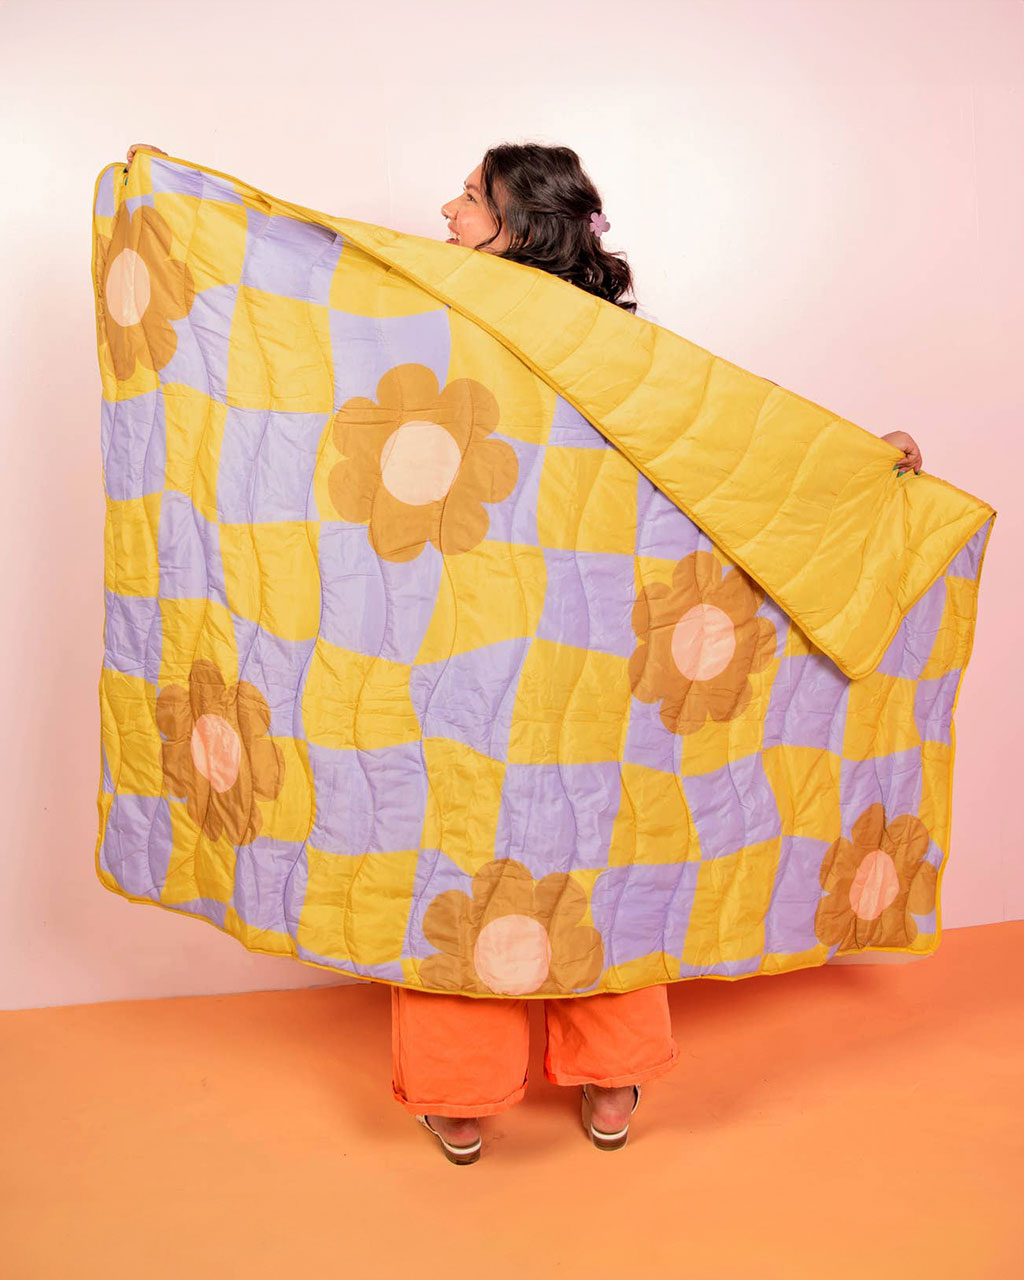 https://cdn.shopify.com/s/files/1/0787/5255/files/bando-3p-talking-out-of-turn-puffy-blanket-cool-funky-daisy-02.jpg?v=1691505853